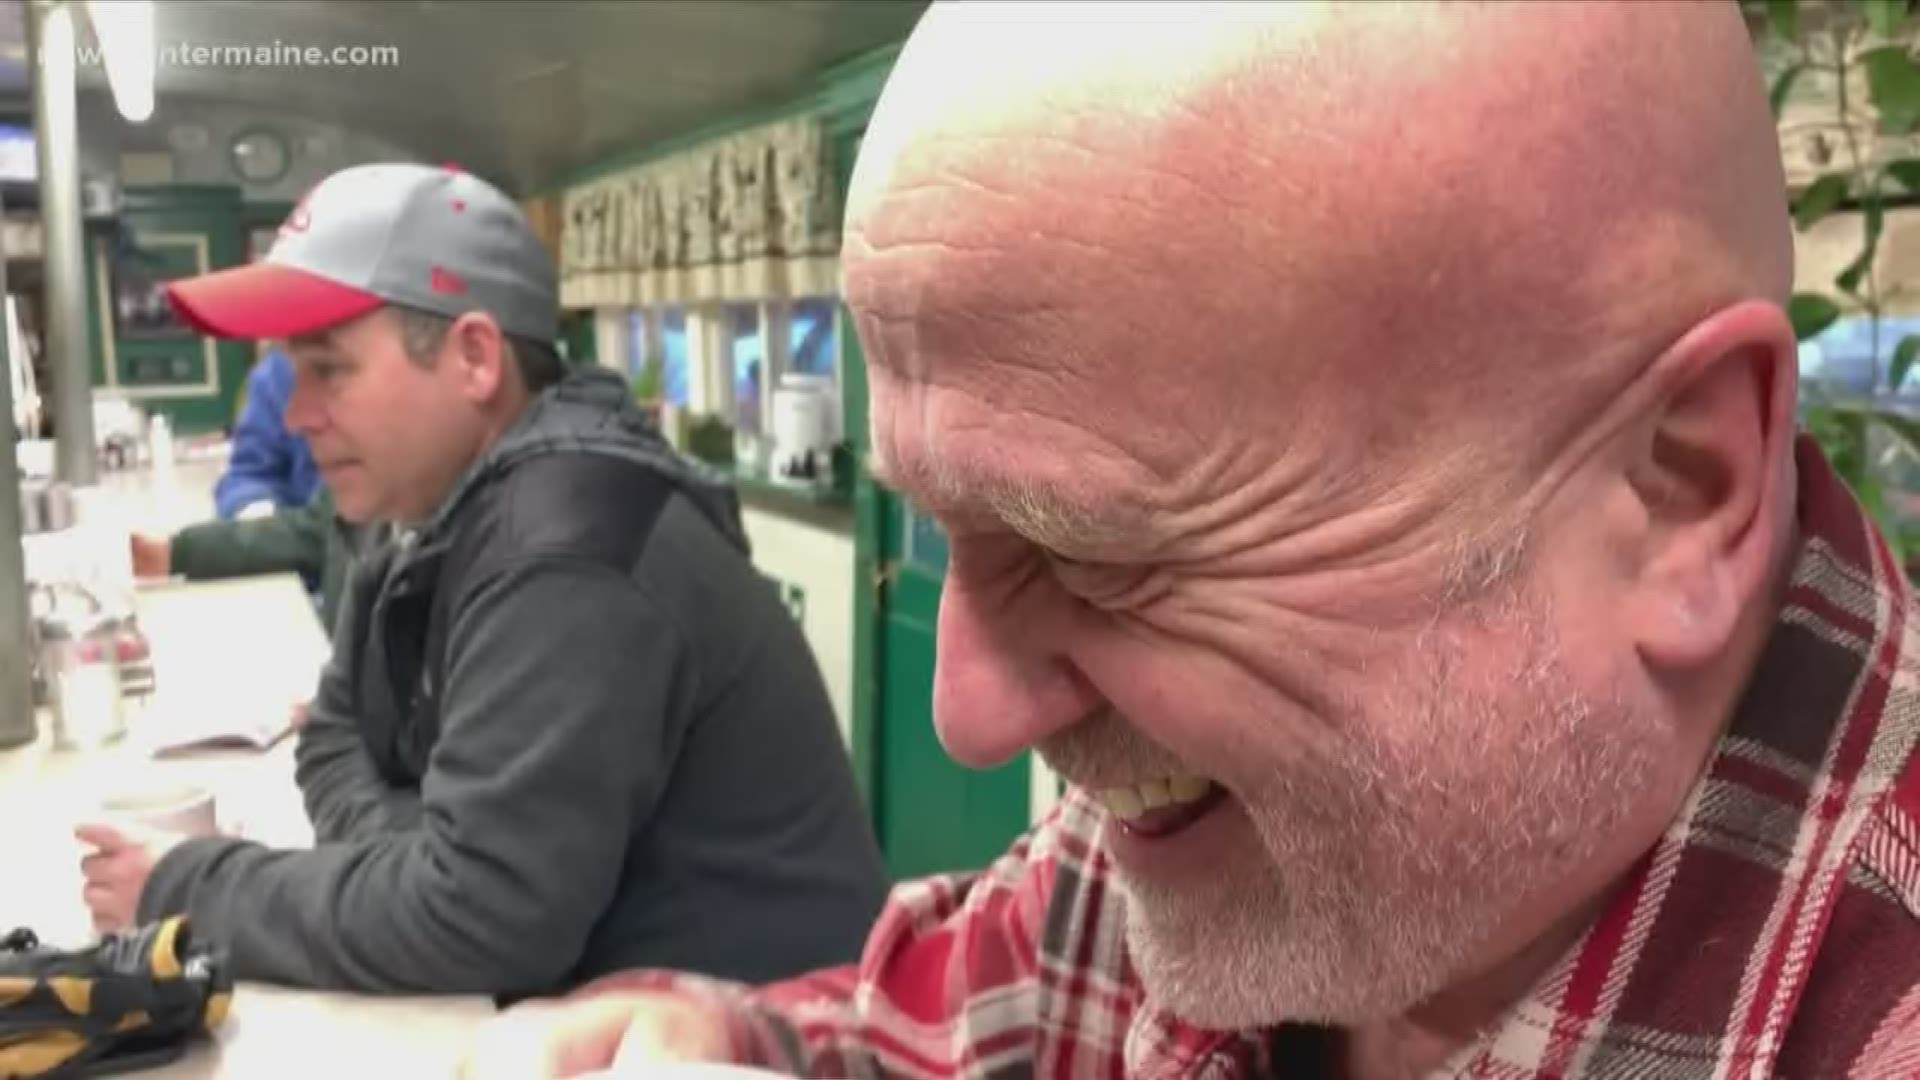 Self-proclaimed home of eggs and insults, the Deluxe Diner is one Maine's oldest diners. As one customer says, "If you can't take it, don't come in here."